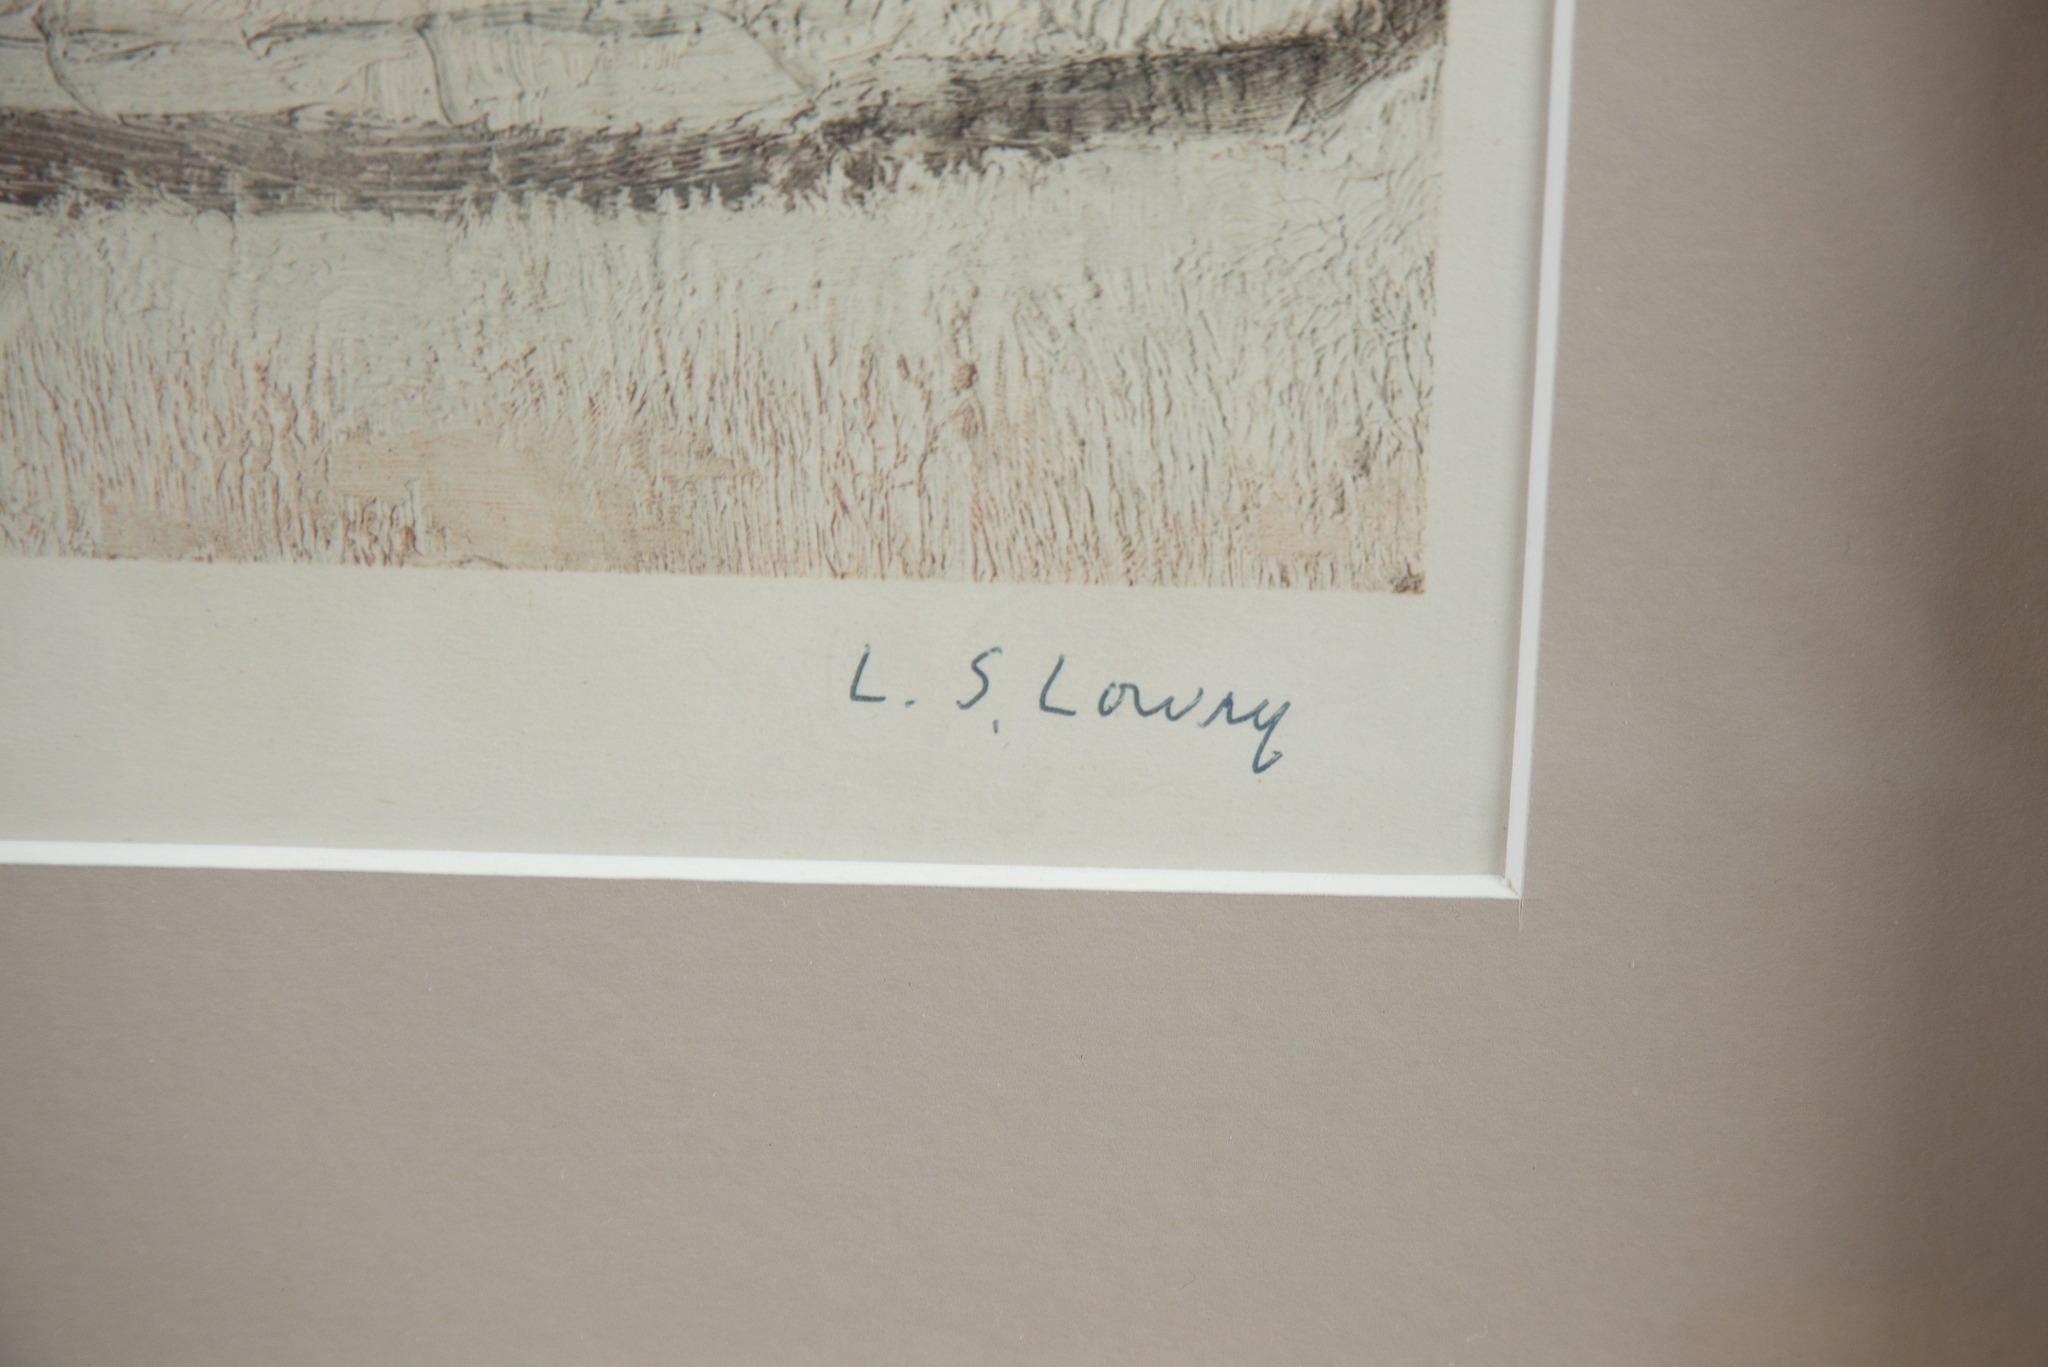 L S LOWRY ARTIST SIGNED LIMITED EDITION COLOUR PRINT ‘The Family’, from an edition of - Image 3 of 3